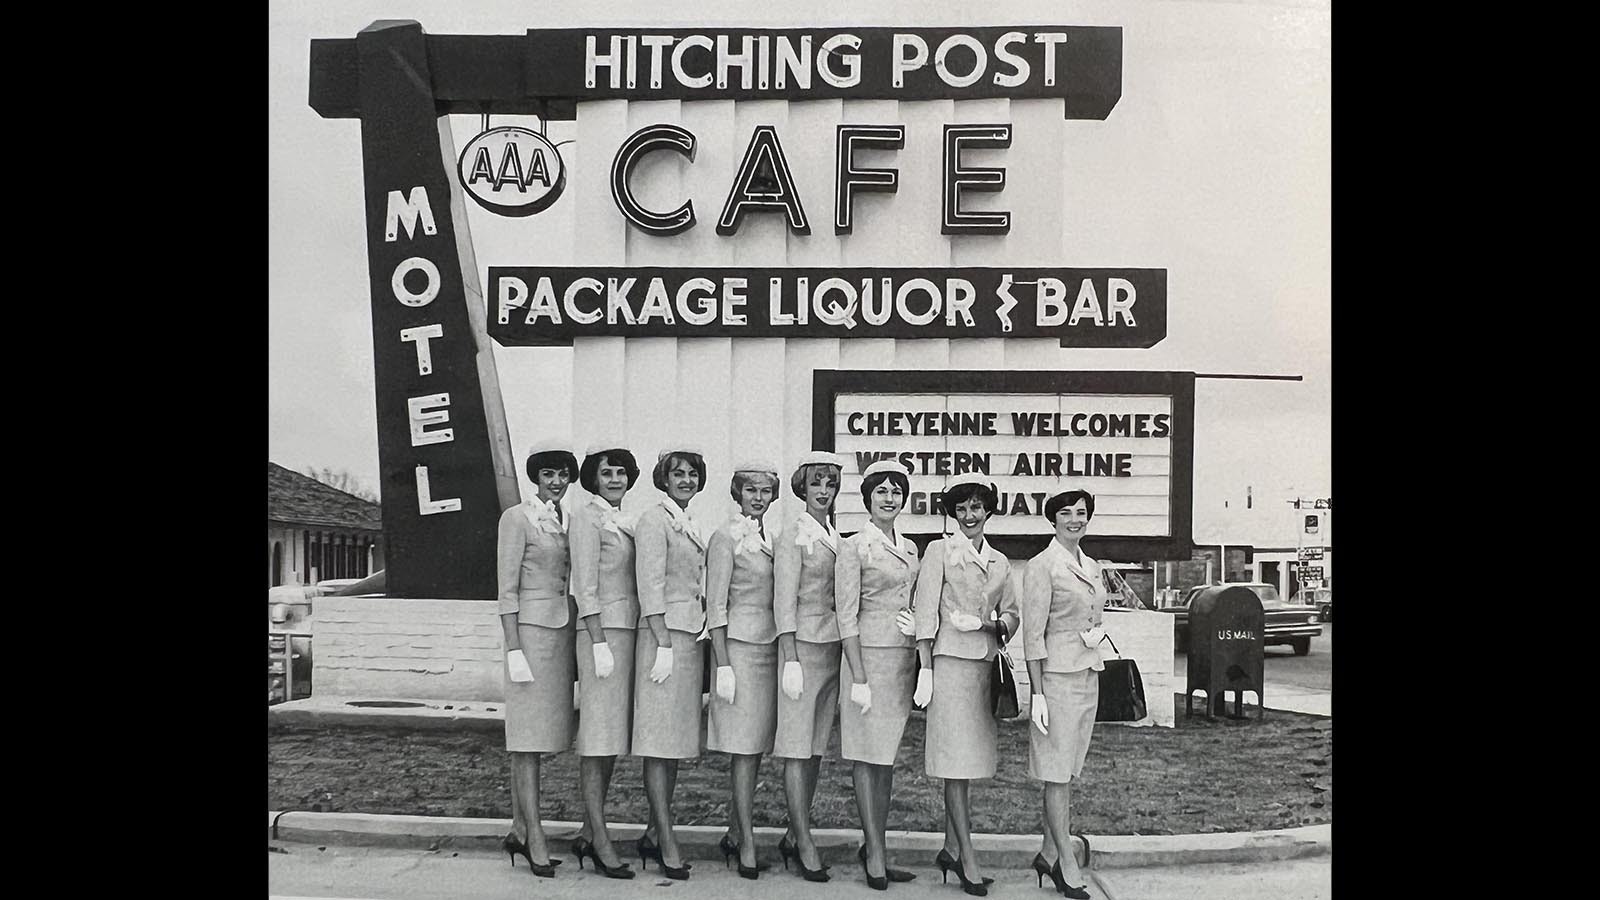 The Hitching Post Inn was a hub of social and business activity in its heyday.